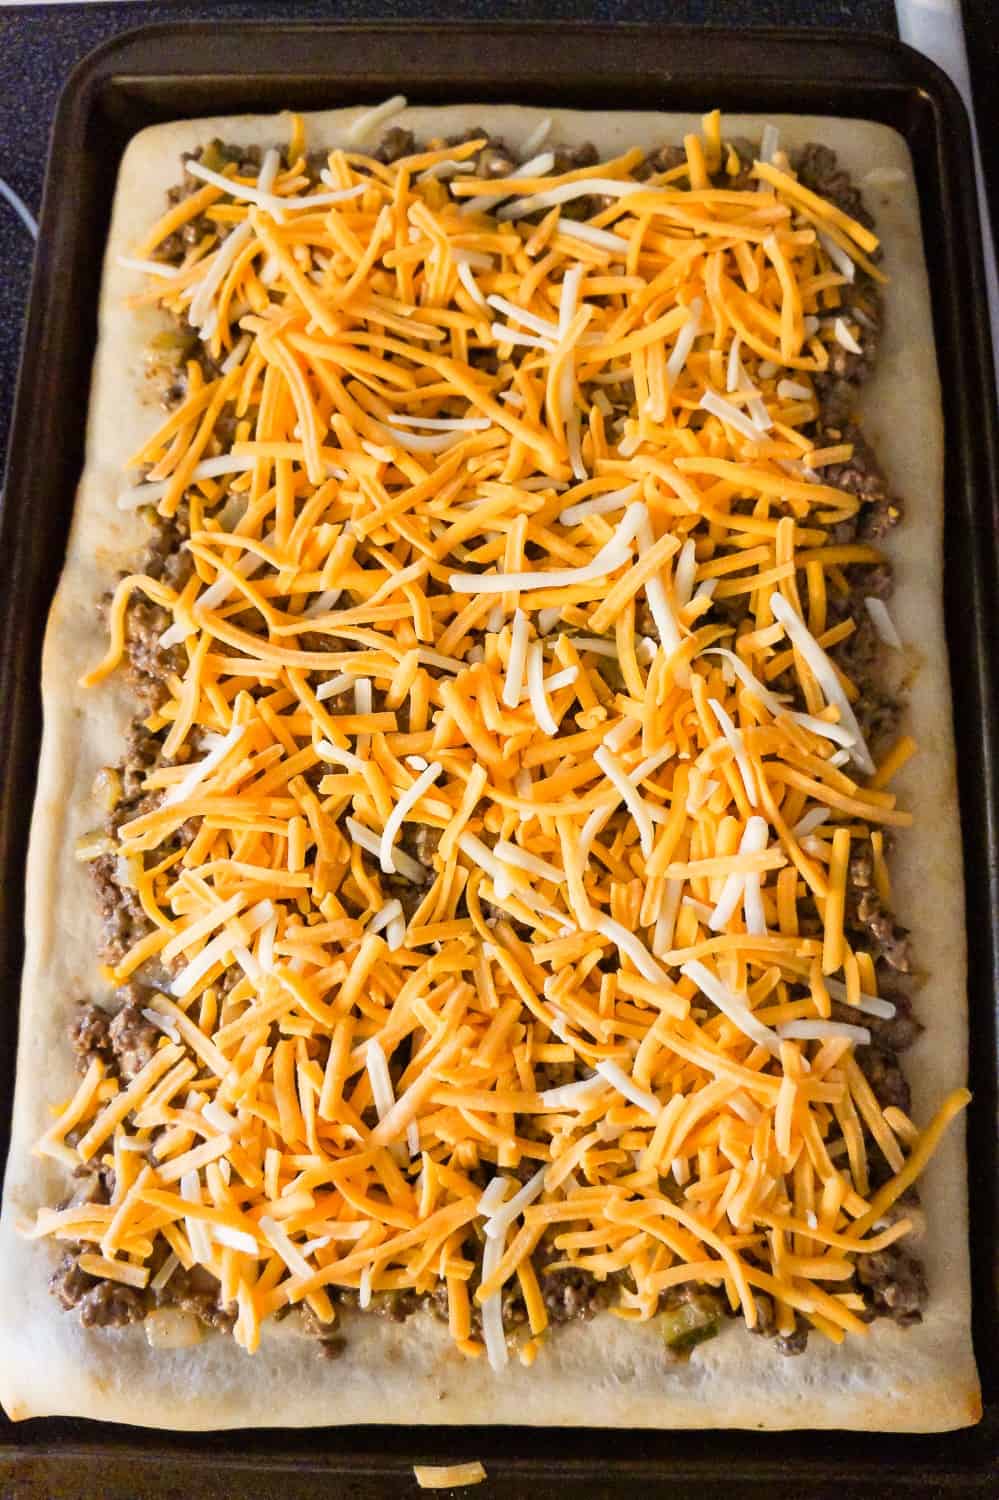 shredded cheddar cheese on top of big mac pizza before baking